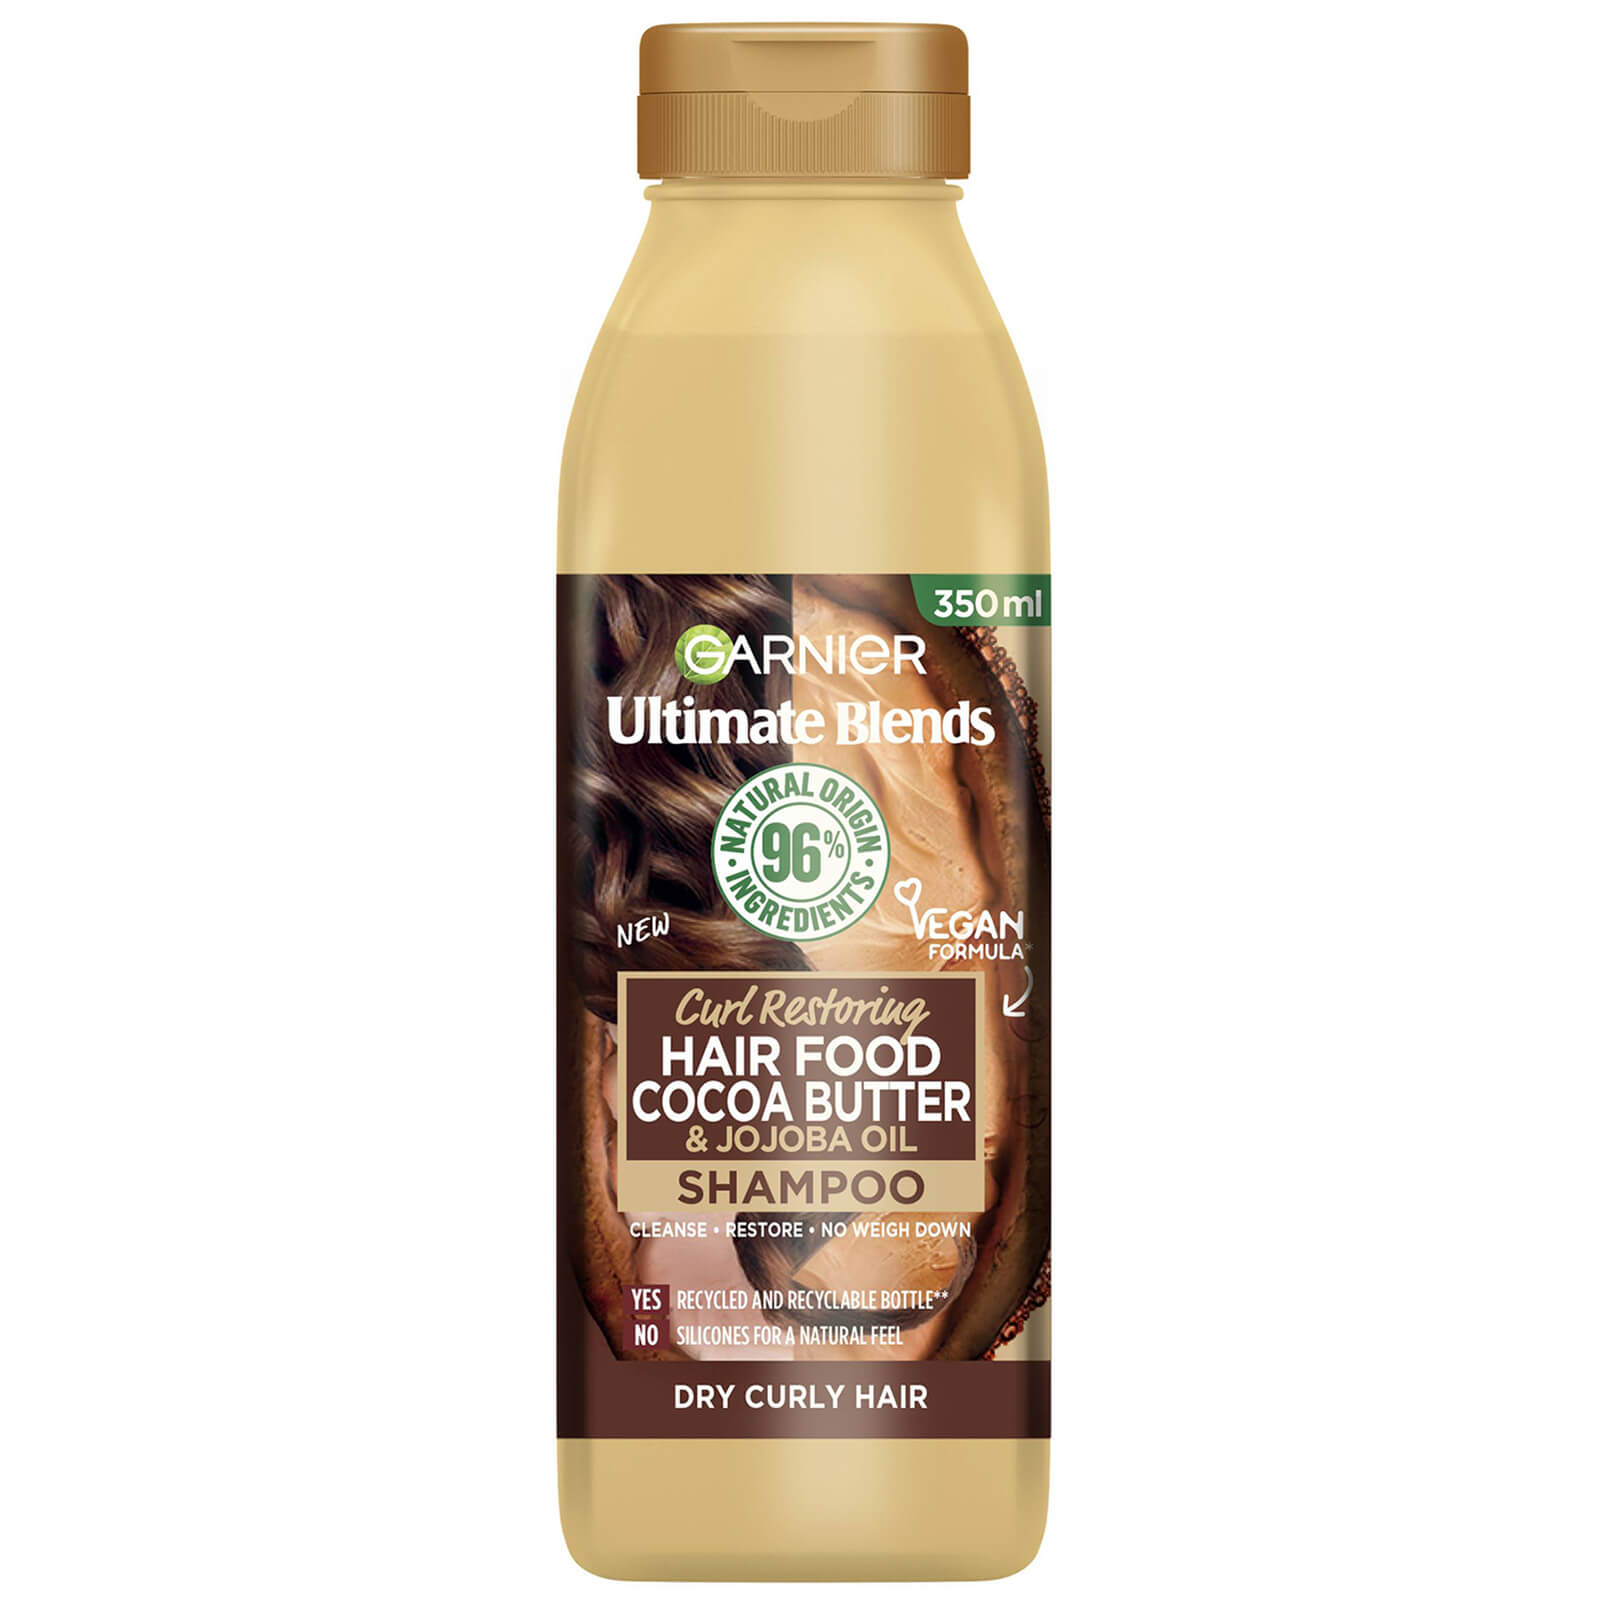 Photos - Hair Product Garnier Ultimate Blends Cocoa Butter Shampoo for Dry, Curly Hair 350ml C66 